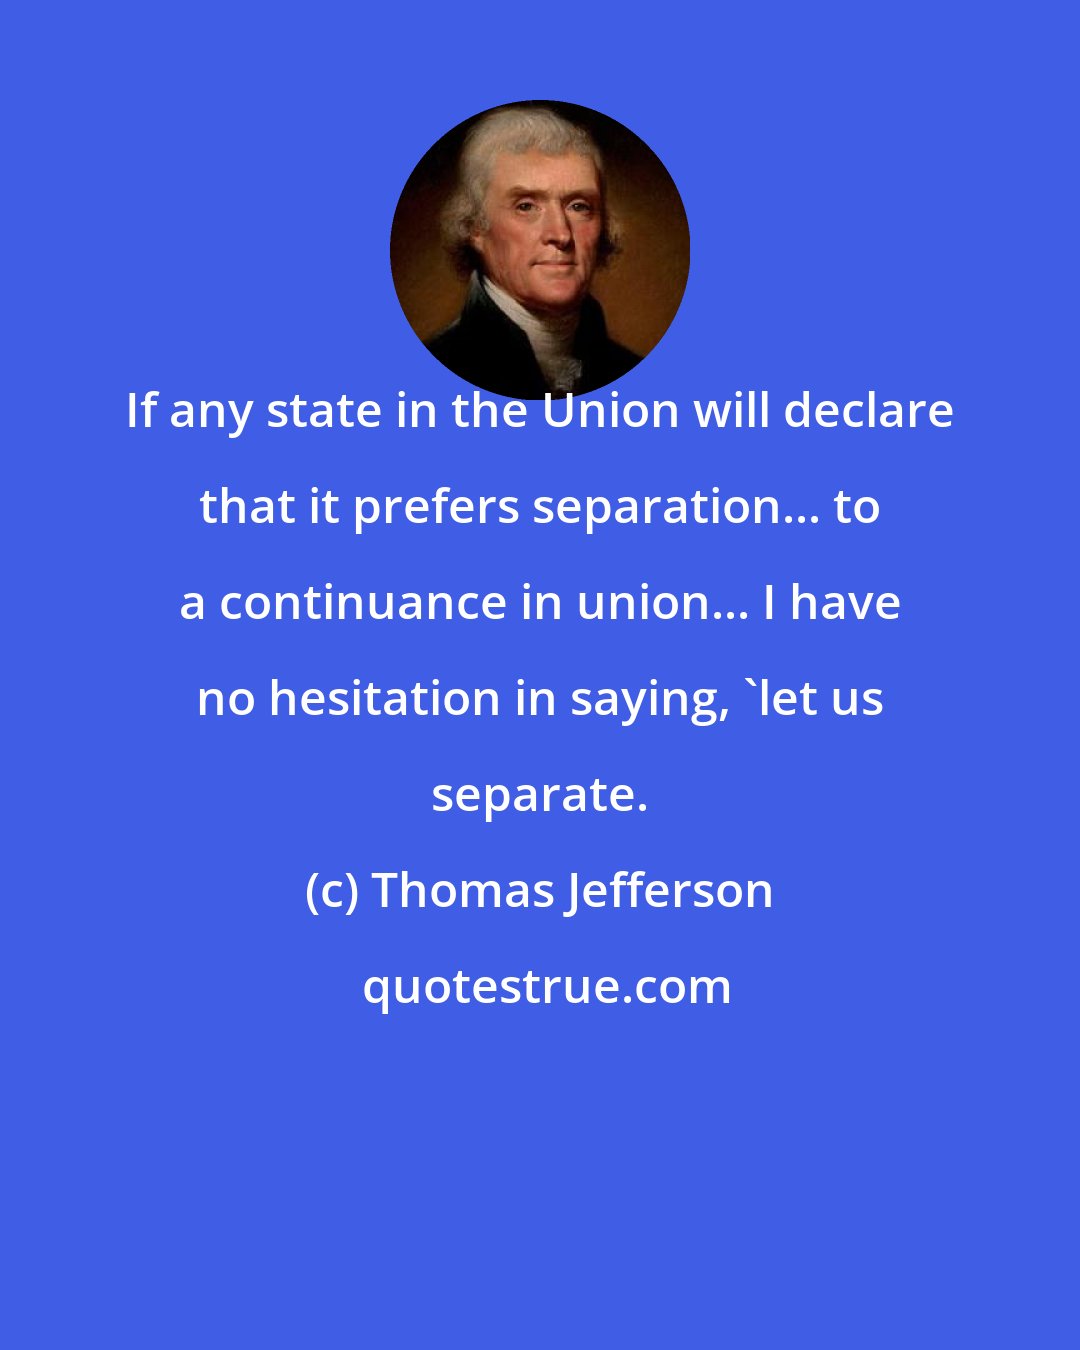 Thomas Jefferson: If any state in the Union will declare that it prefers separation... to a continuance in union... I have no hesitation in saying, 'let us separate.